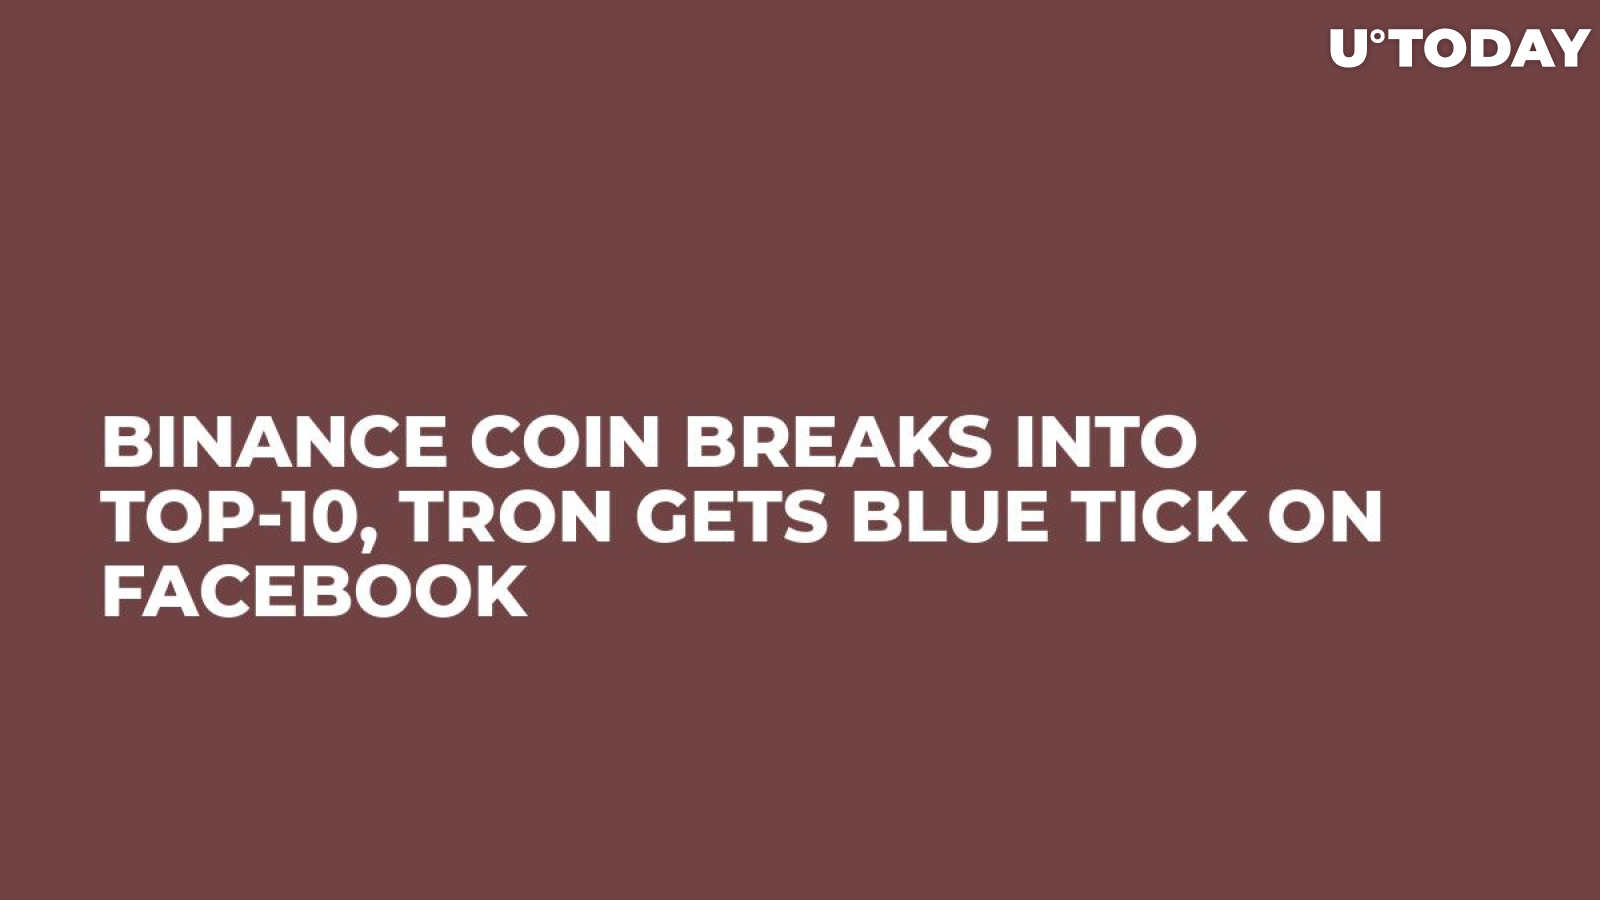 Binance Coin Breaks Into Top-10, Tron Gets Blue Tick on Facebook